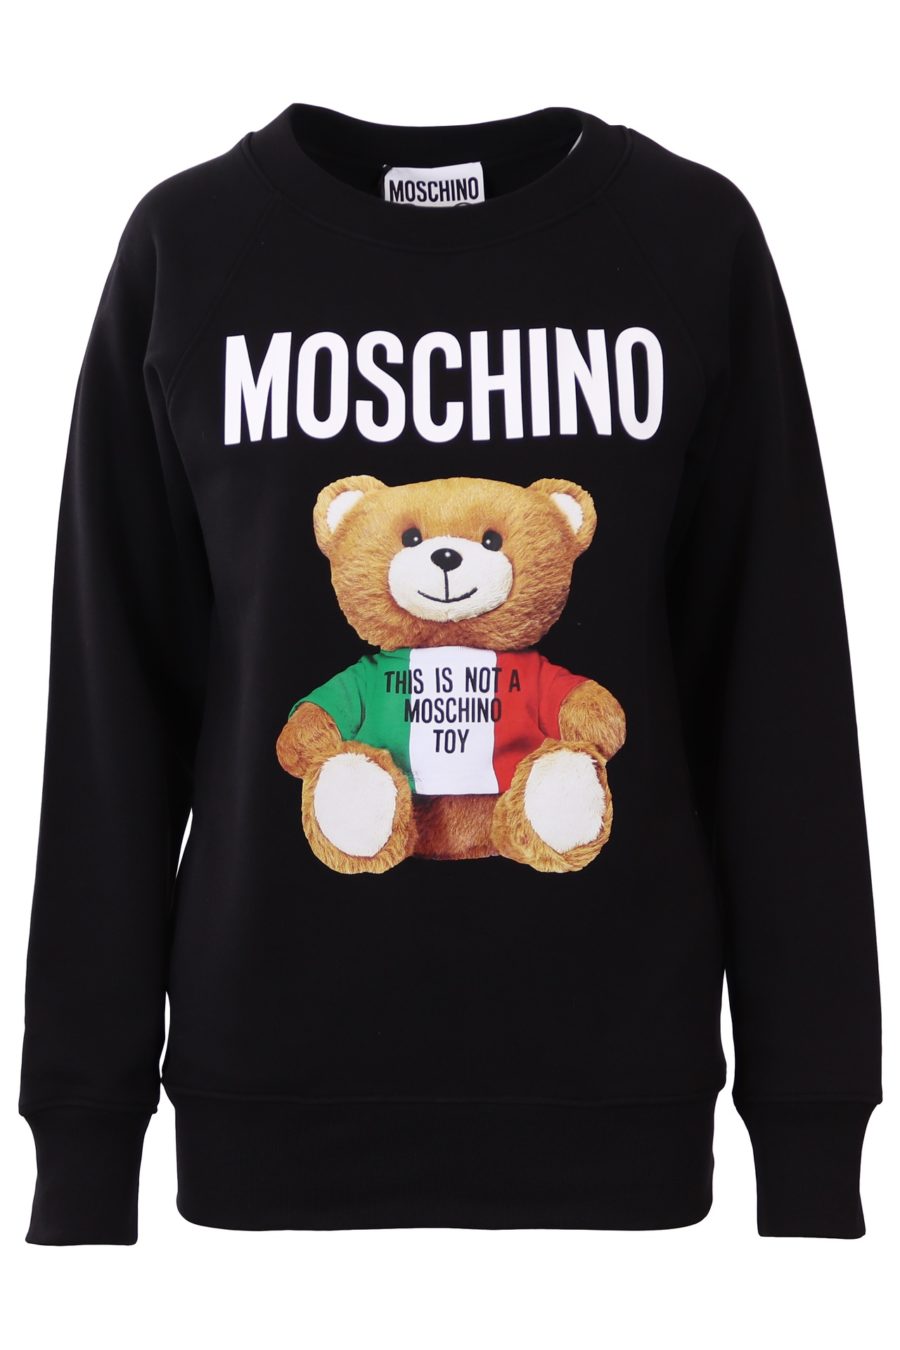 Moschino Couture sweat noir avec ours italien - 3ff710eb767628646a8314aa391e9ebe50aa3755